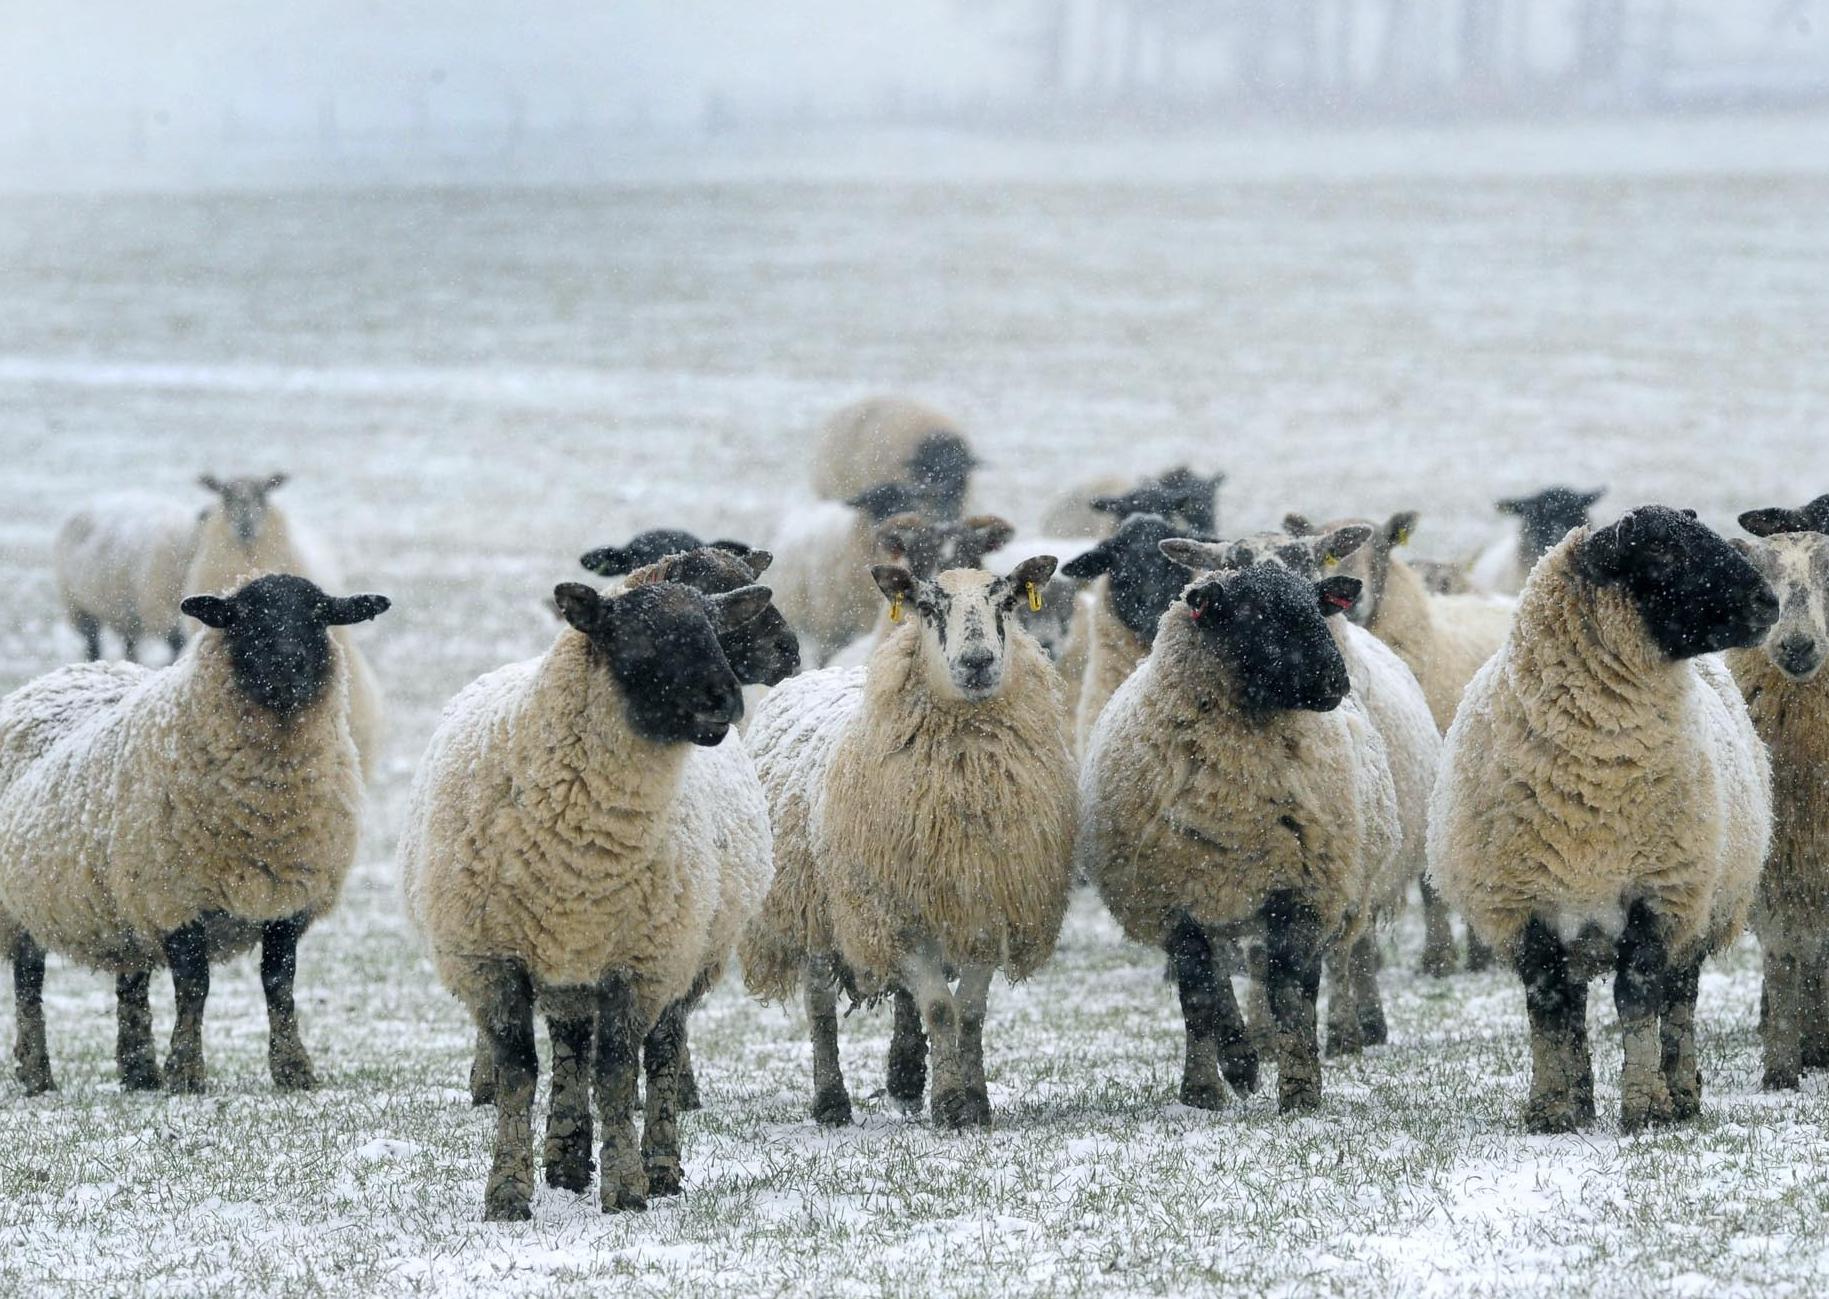 Sheep near Ashkirk wait to be fed during the snow falls in January 2013.